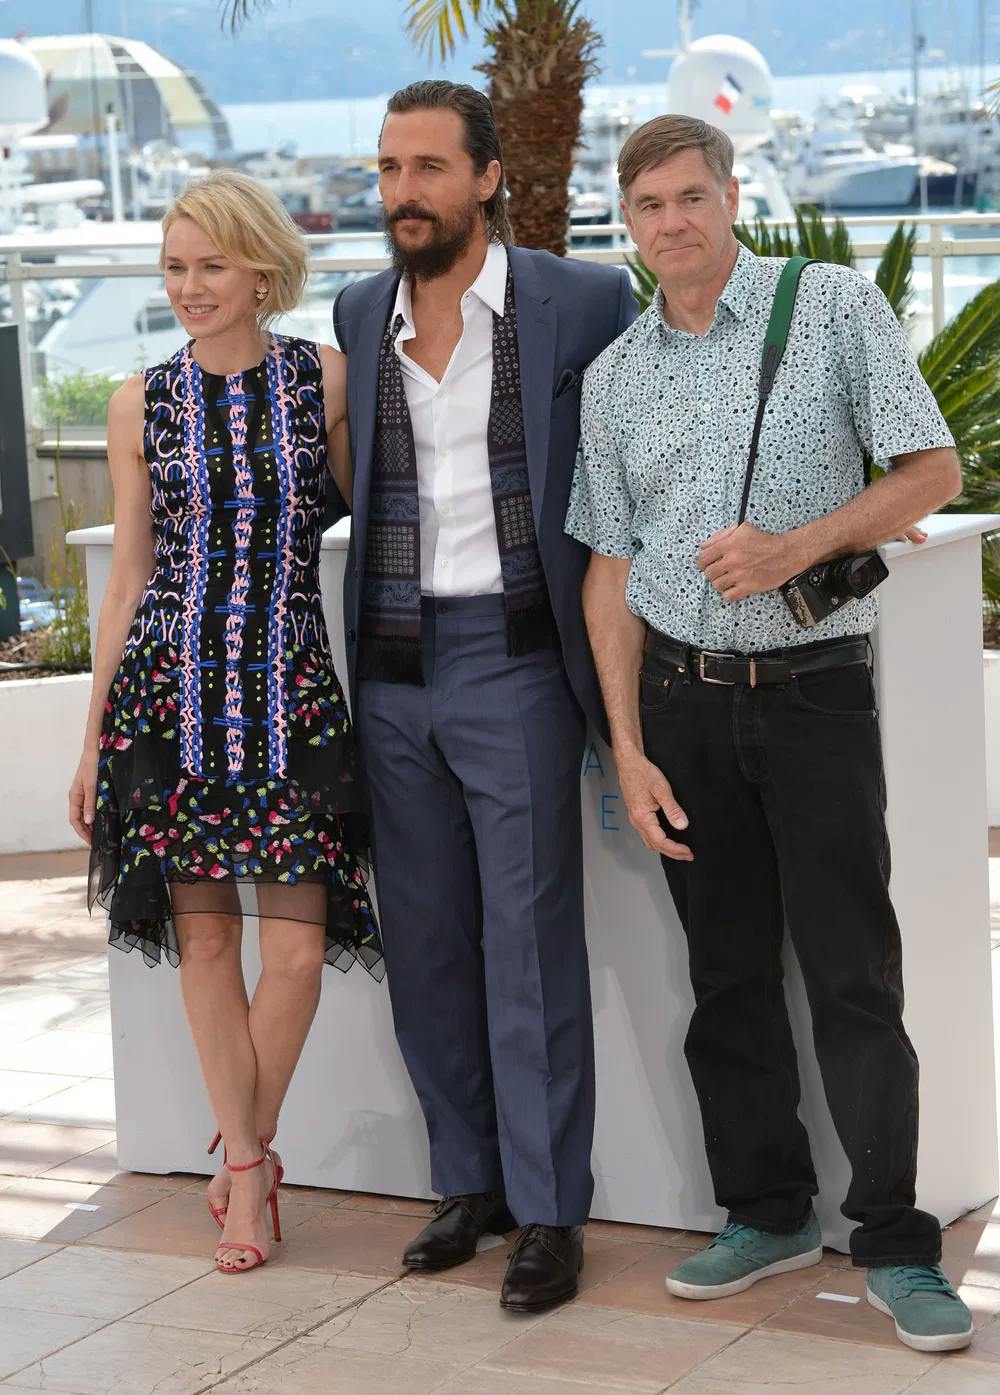 Drown in a "Sea of Trees": Naomi Watts, Matthew McConaughey, and director Gus Van Sant promote their 2015 film at Cannes. / Photo by Featureflash©, courtesy of Dreamstime.